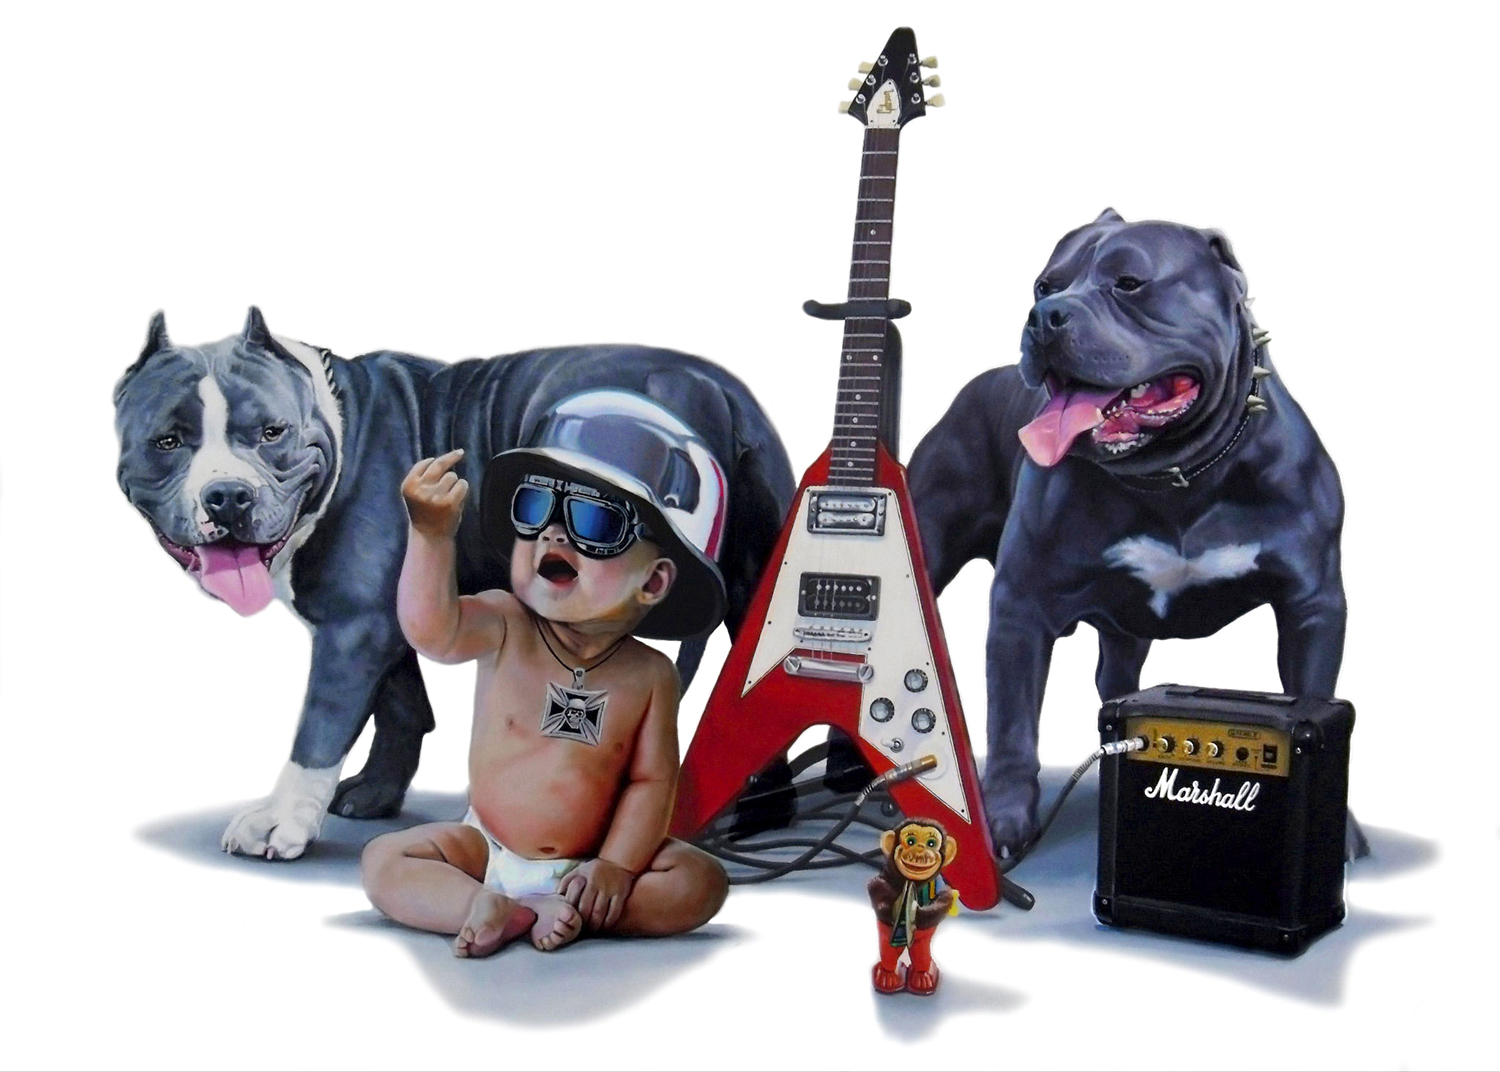 A baby wearing a helmet and goggles with his middle finger up surrounded by two dogs and a guitar -